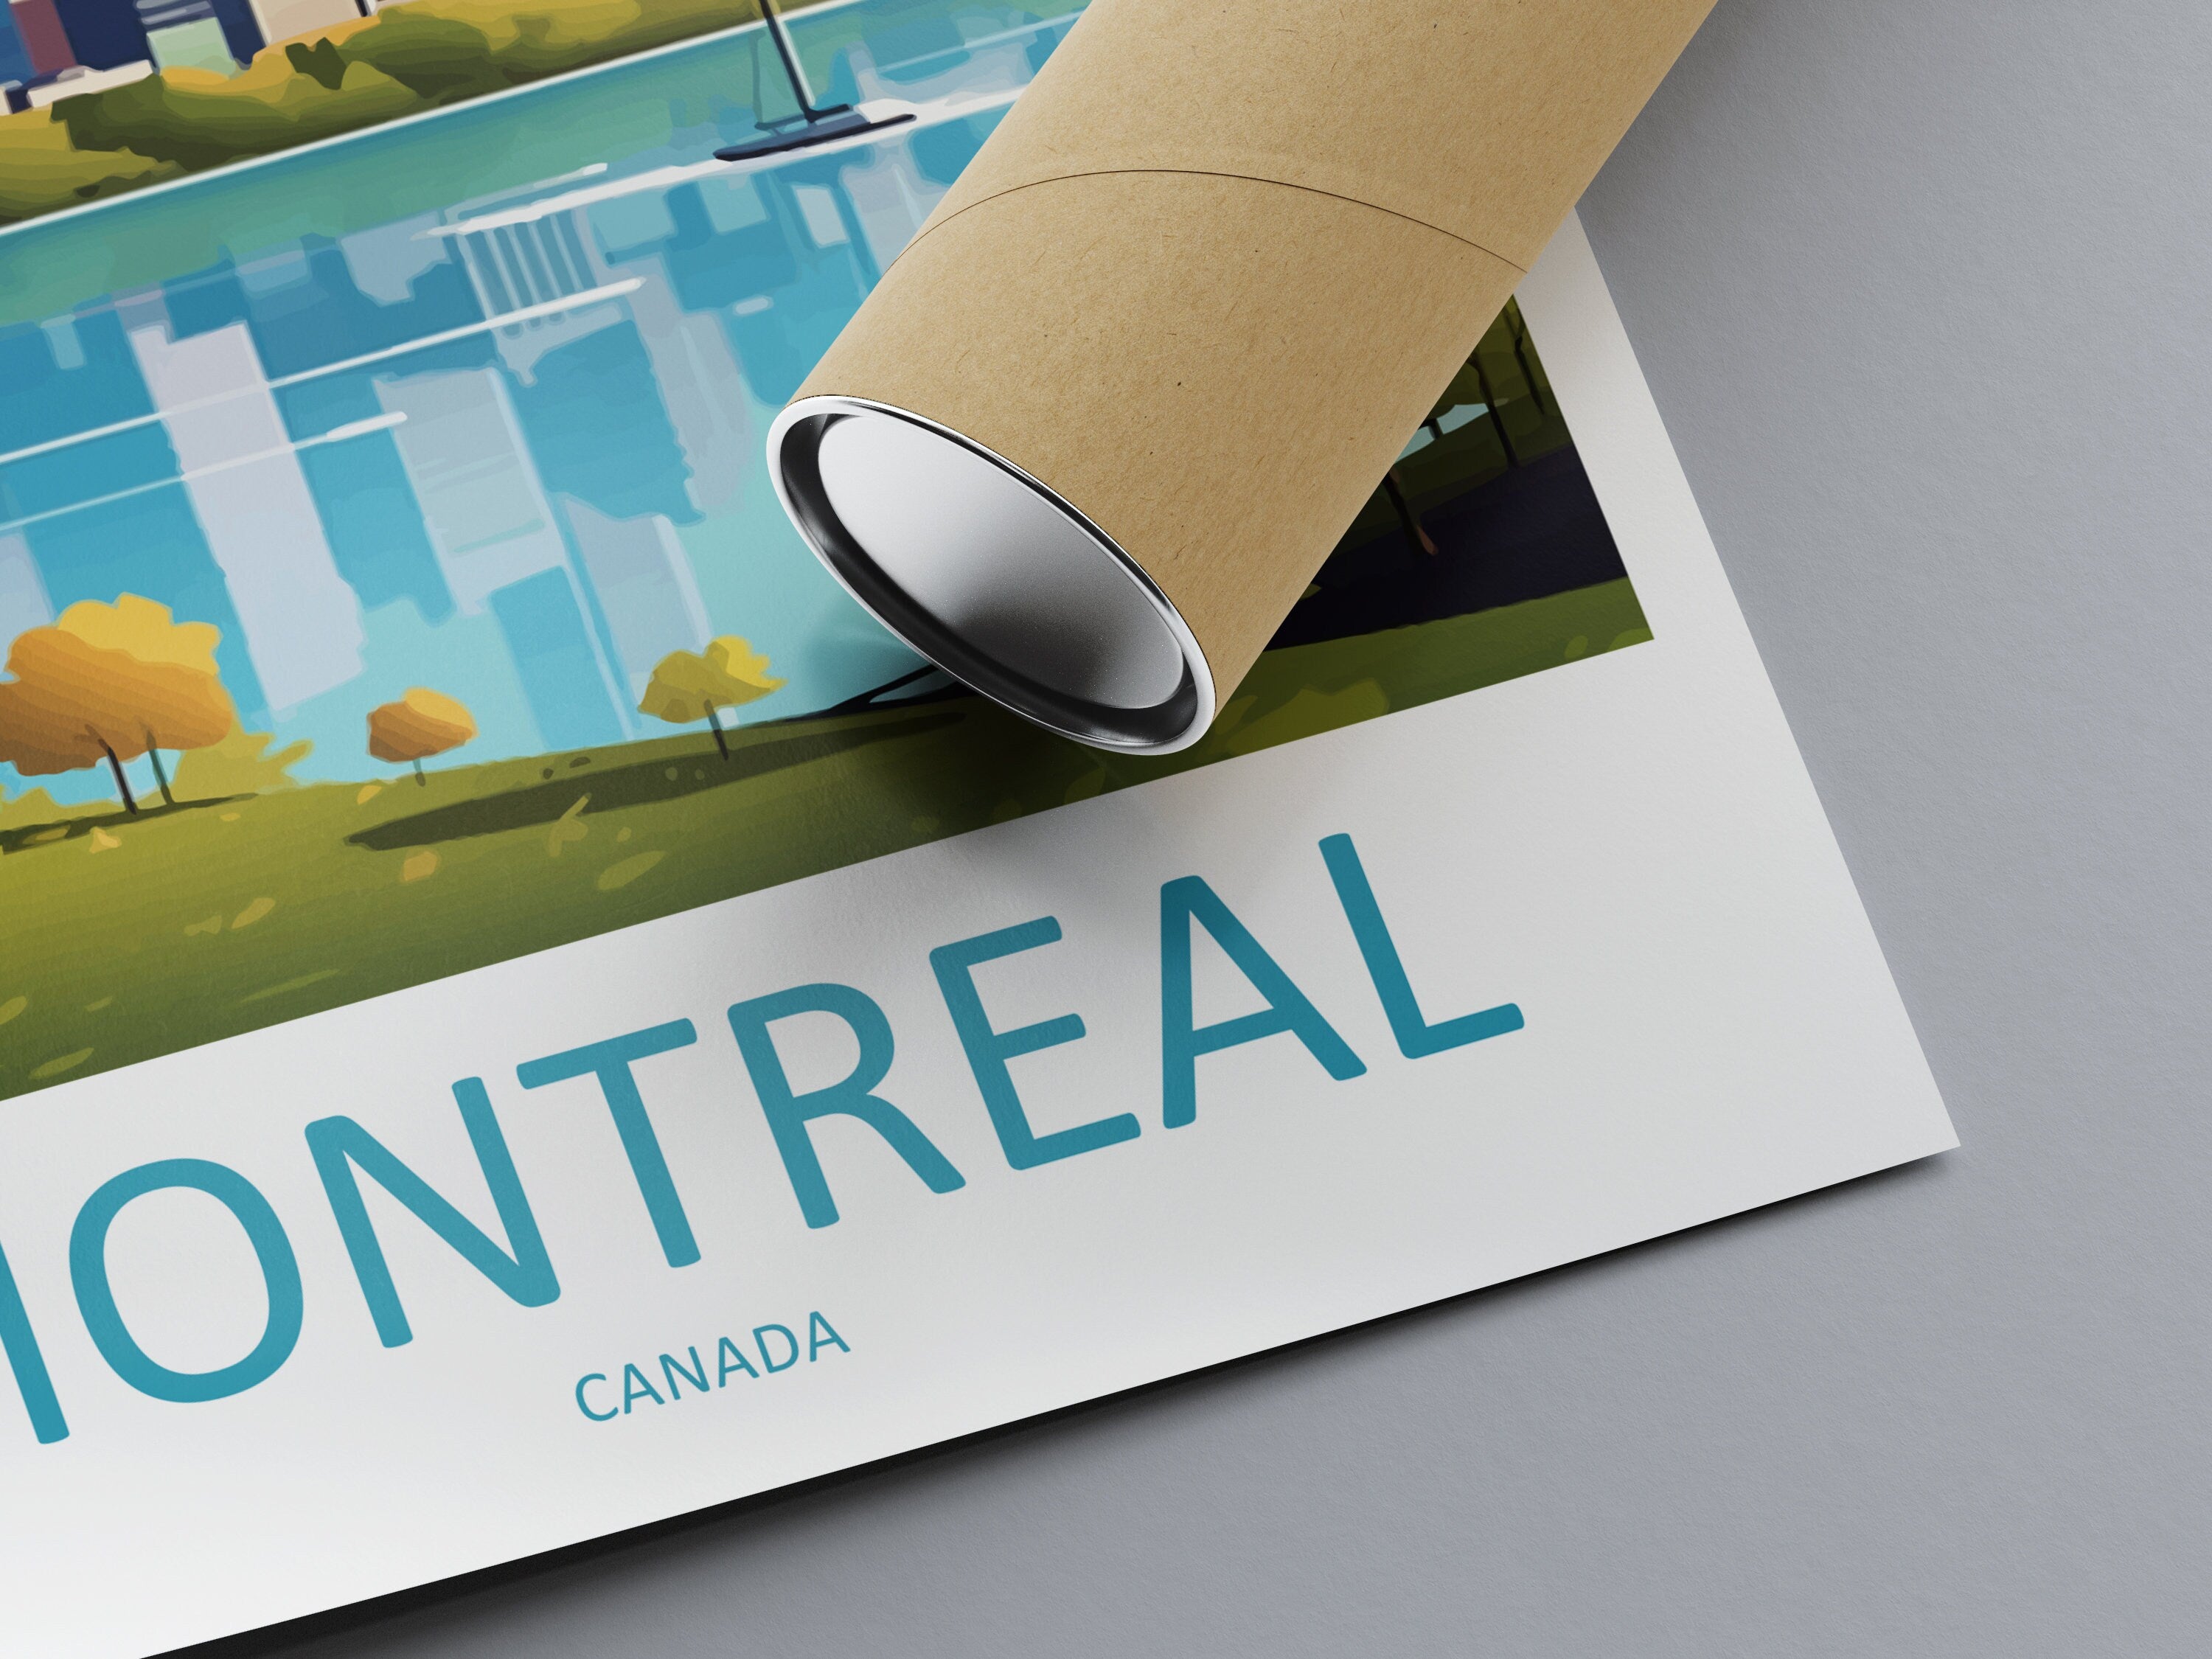 Montreal Travel Print Wall Art Montreal Wall Hanging Home Décor MontrealGift Art Lovers Canada Art Lover Gift Montreal City Gift